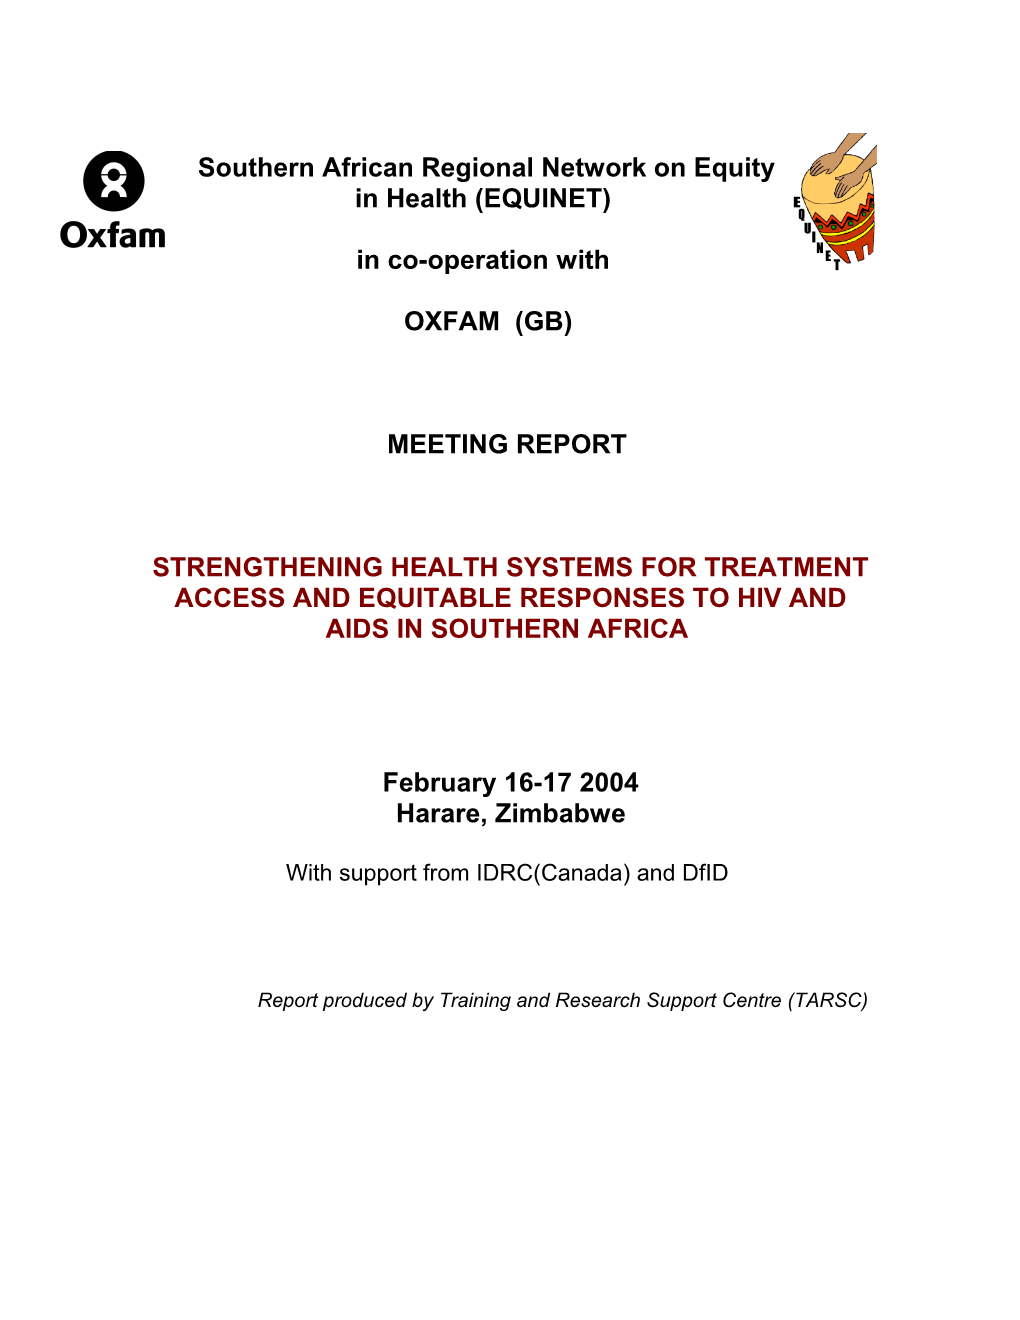 Southern African Regional Network on Equity in Health (EQUINET)